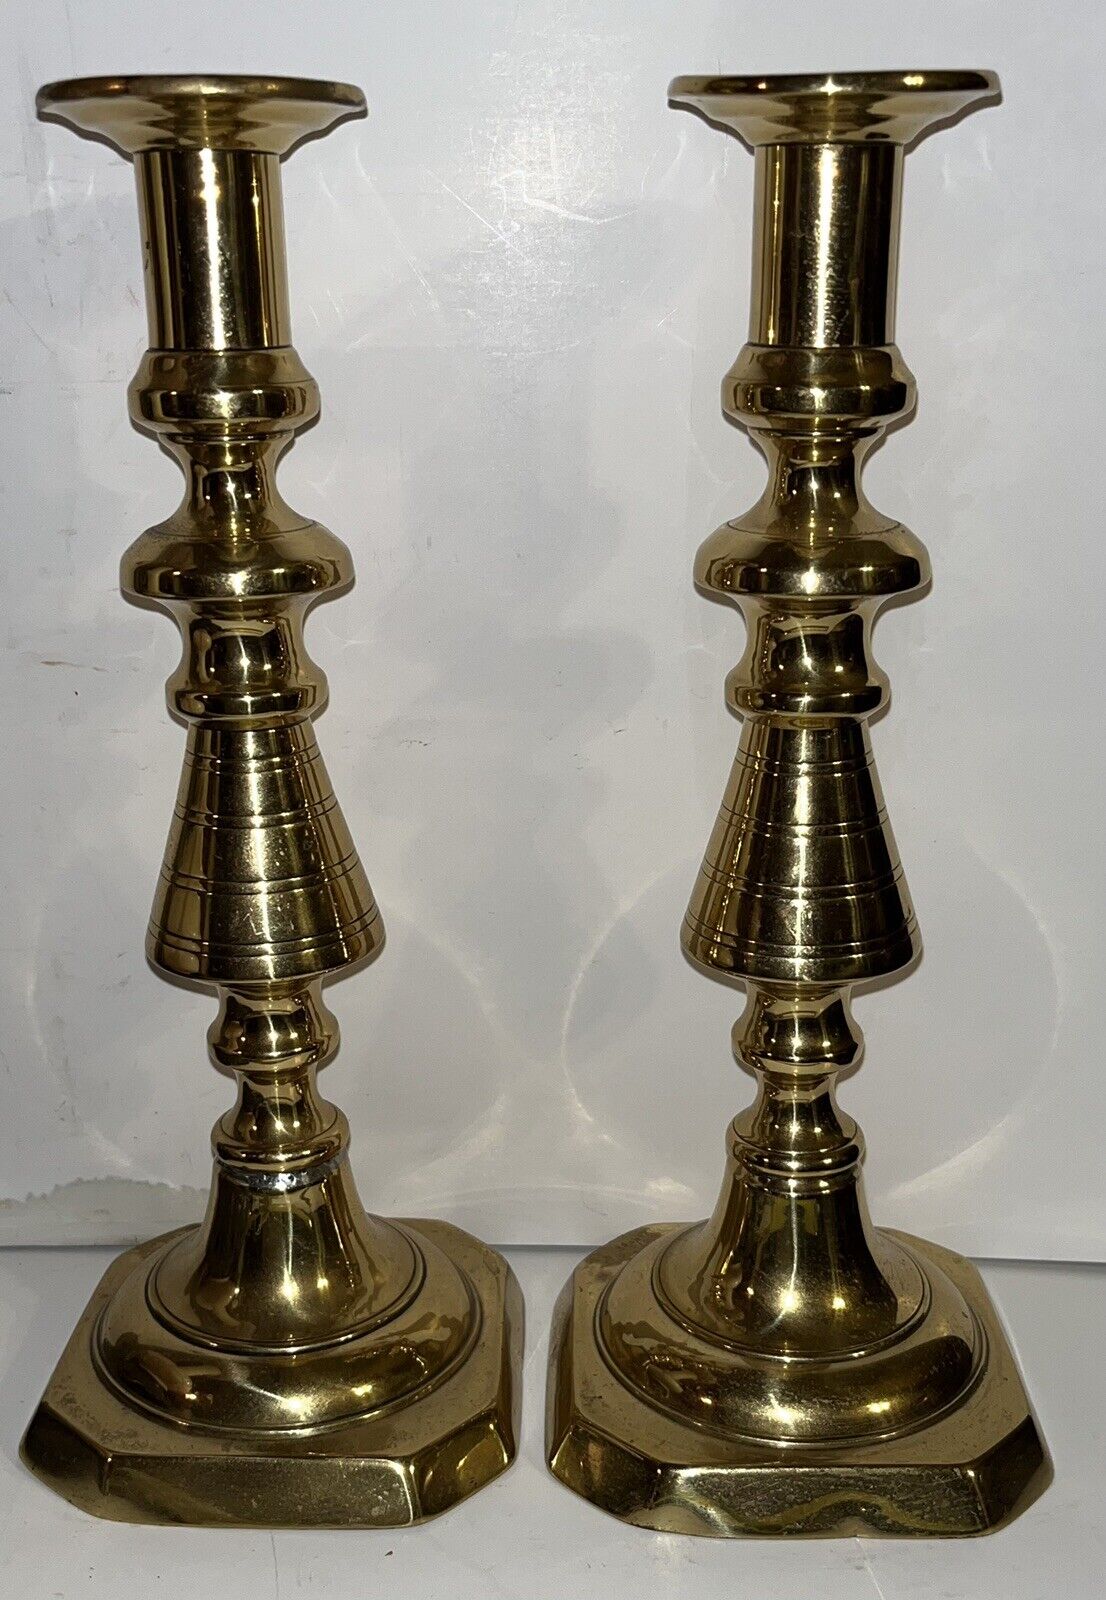 HUGE Antique 1850 Pair Queen Anne Spun Brass Push-up Candle Sticks Polished